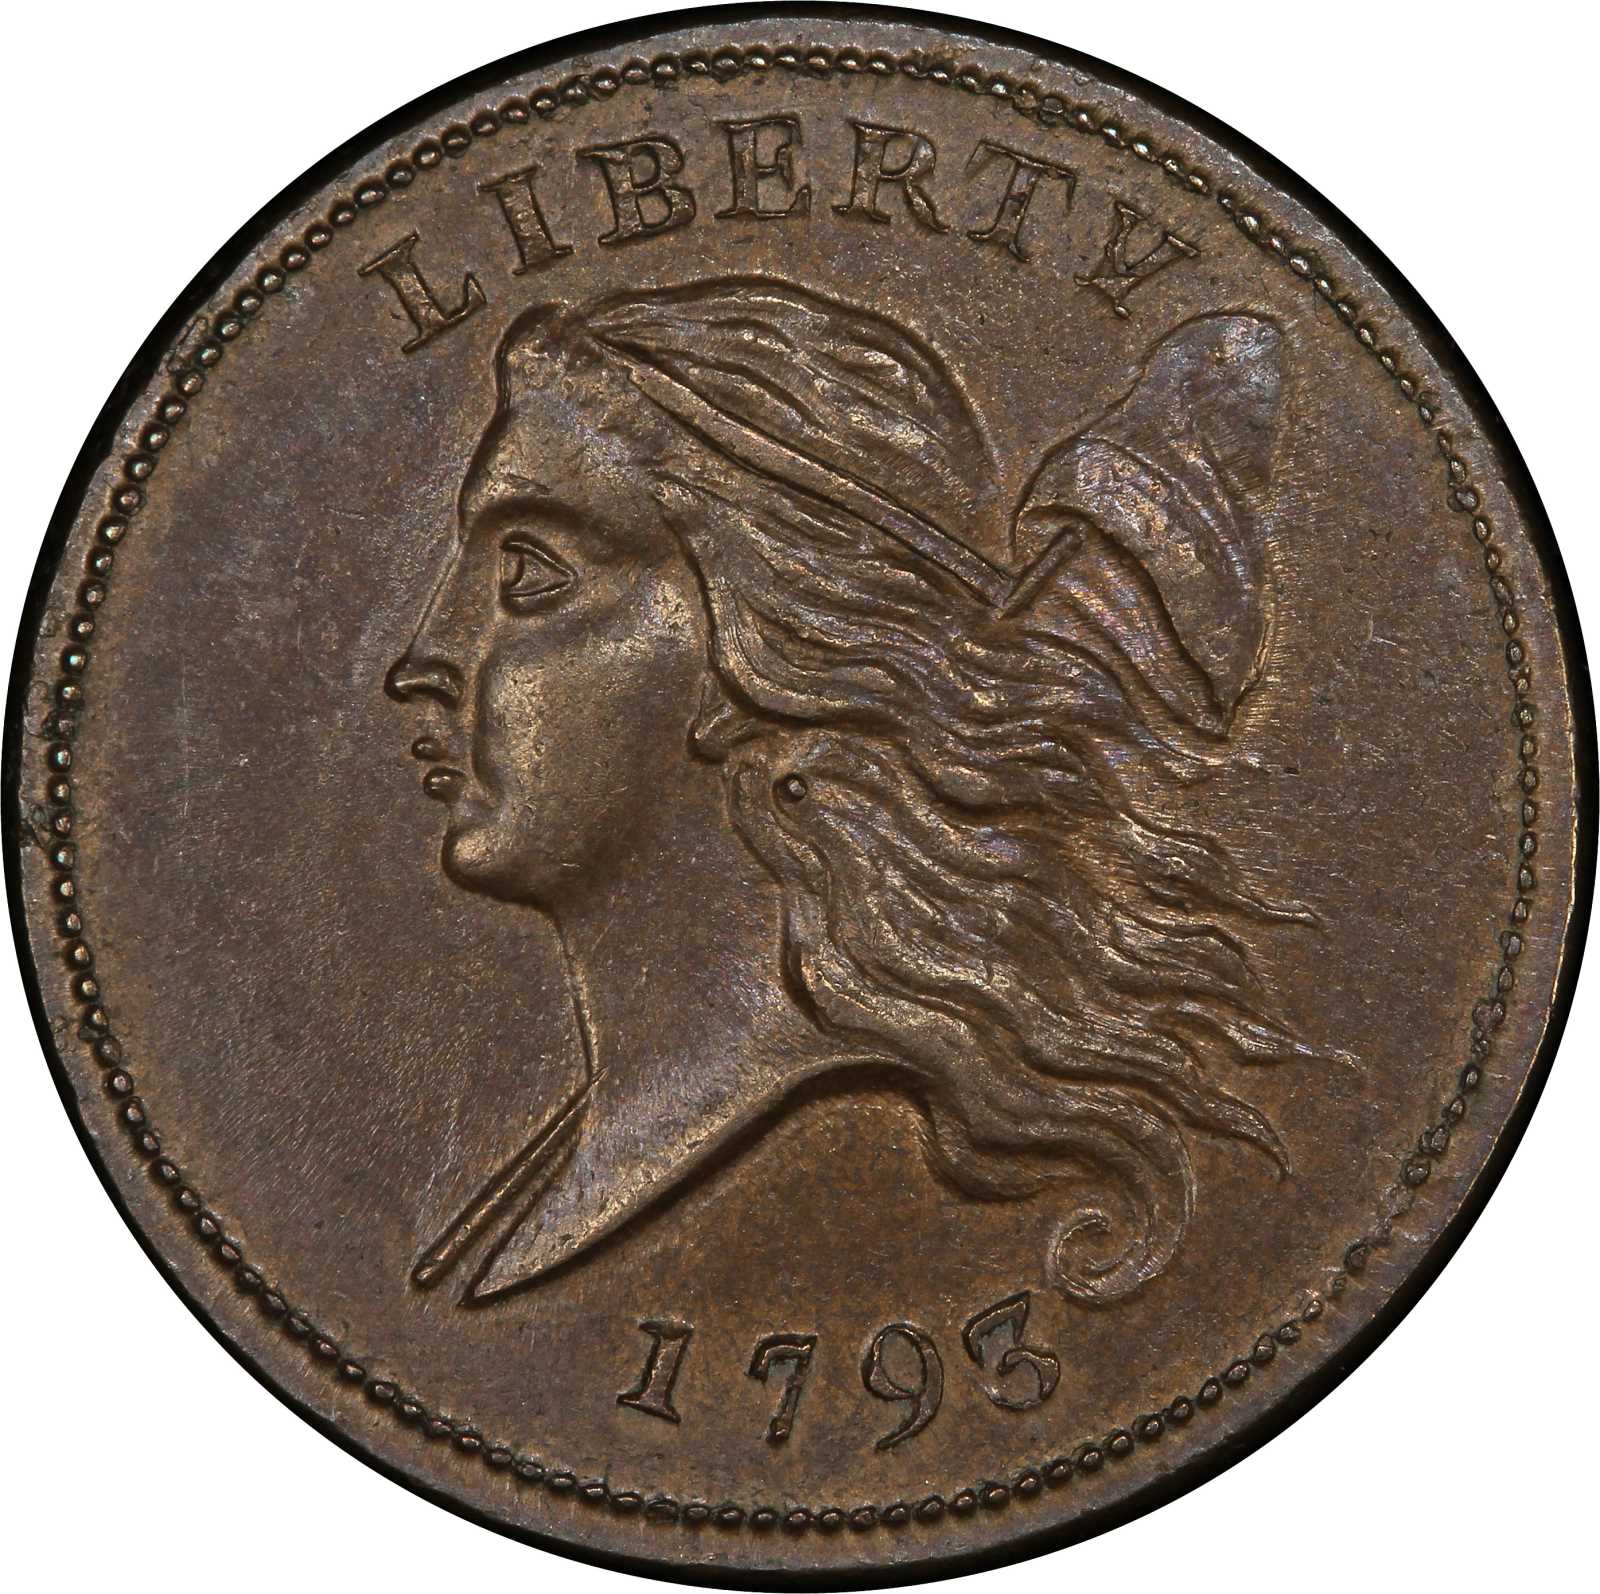 Download 1793 Liberty Cap Half Cent. Cohen-3. Rarity-3. Mint State-64 BN (PCGS). | Stacks Bowers